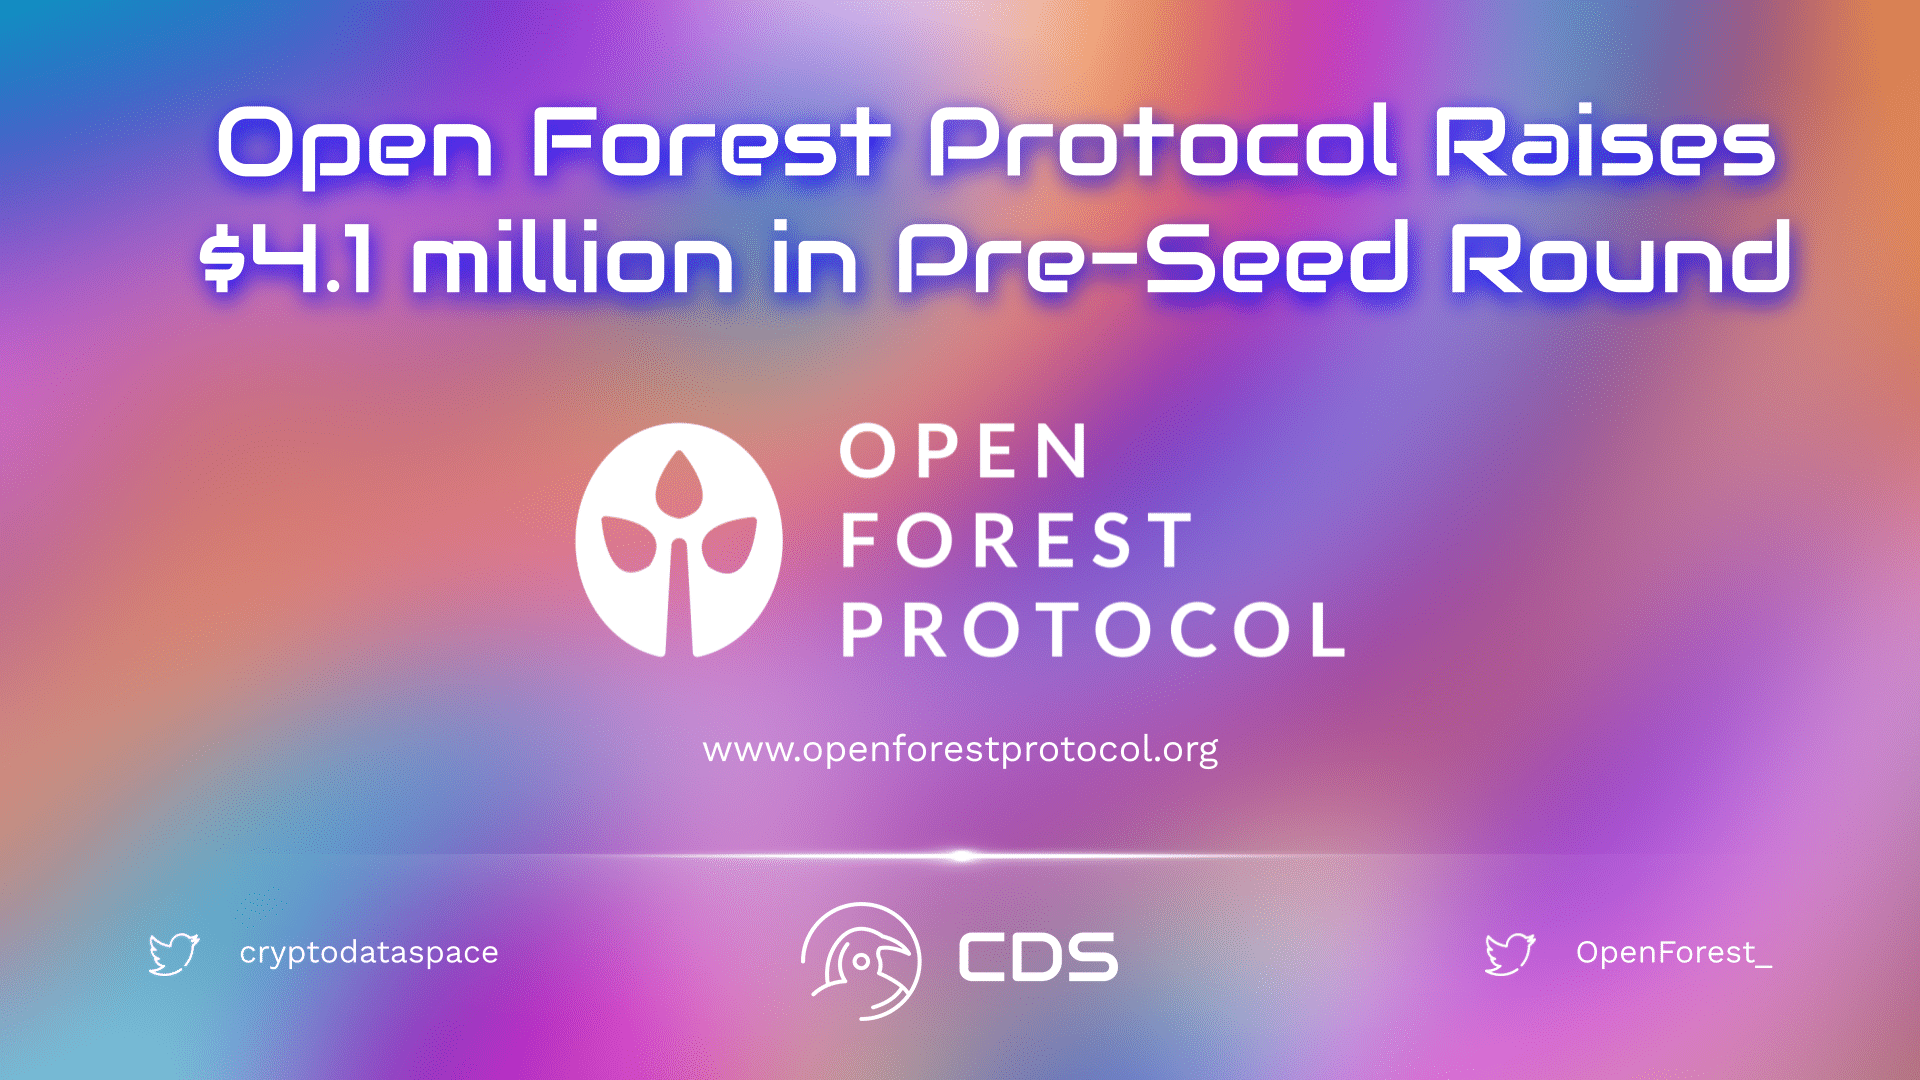 Open Forest Protocol Raises $4.1 million in Pre-Seed Round